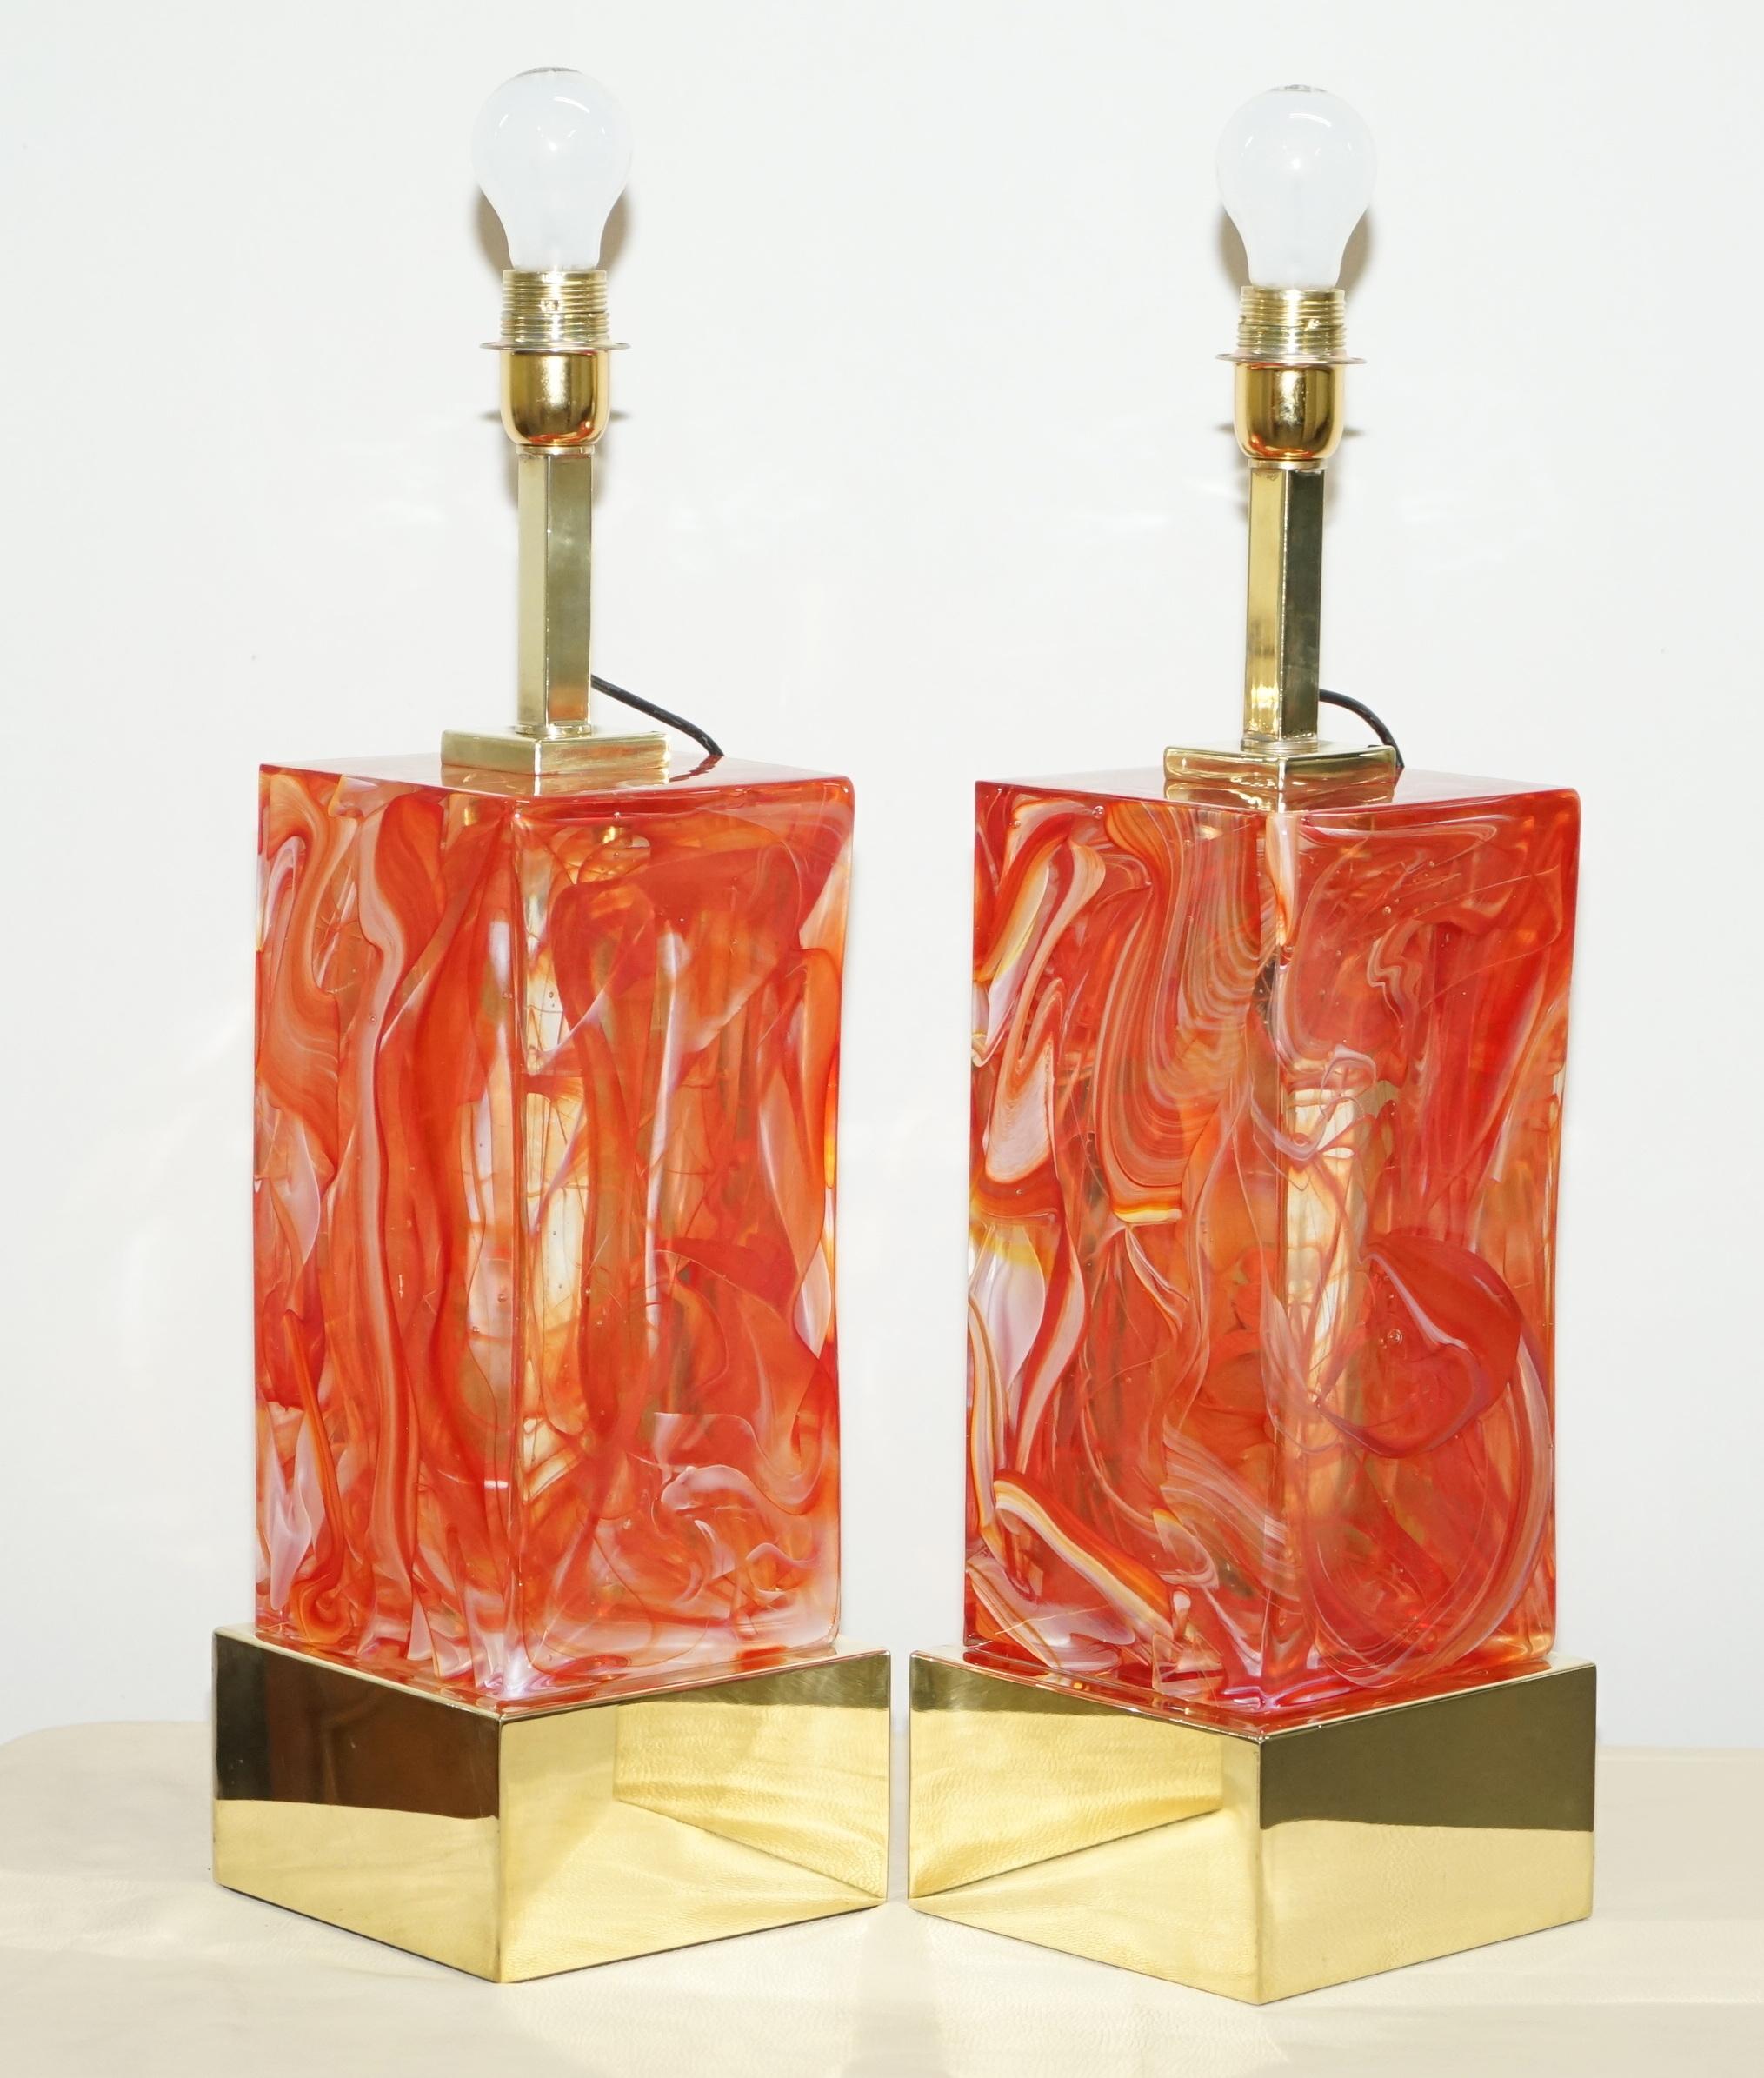 We are delighted to this stunning pair of original Murano solid glass large table lamps with marble finish throughout

These lamps are part of a large selection of Murano lamps that have come straight from the Island of Murano directly to me, I